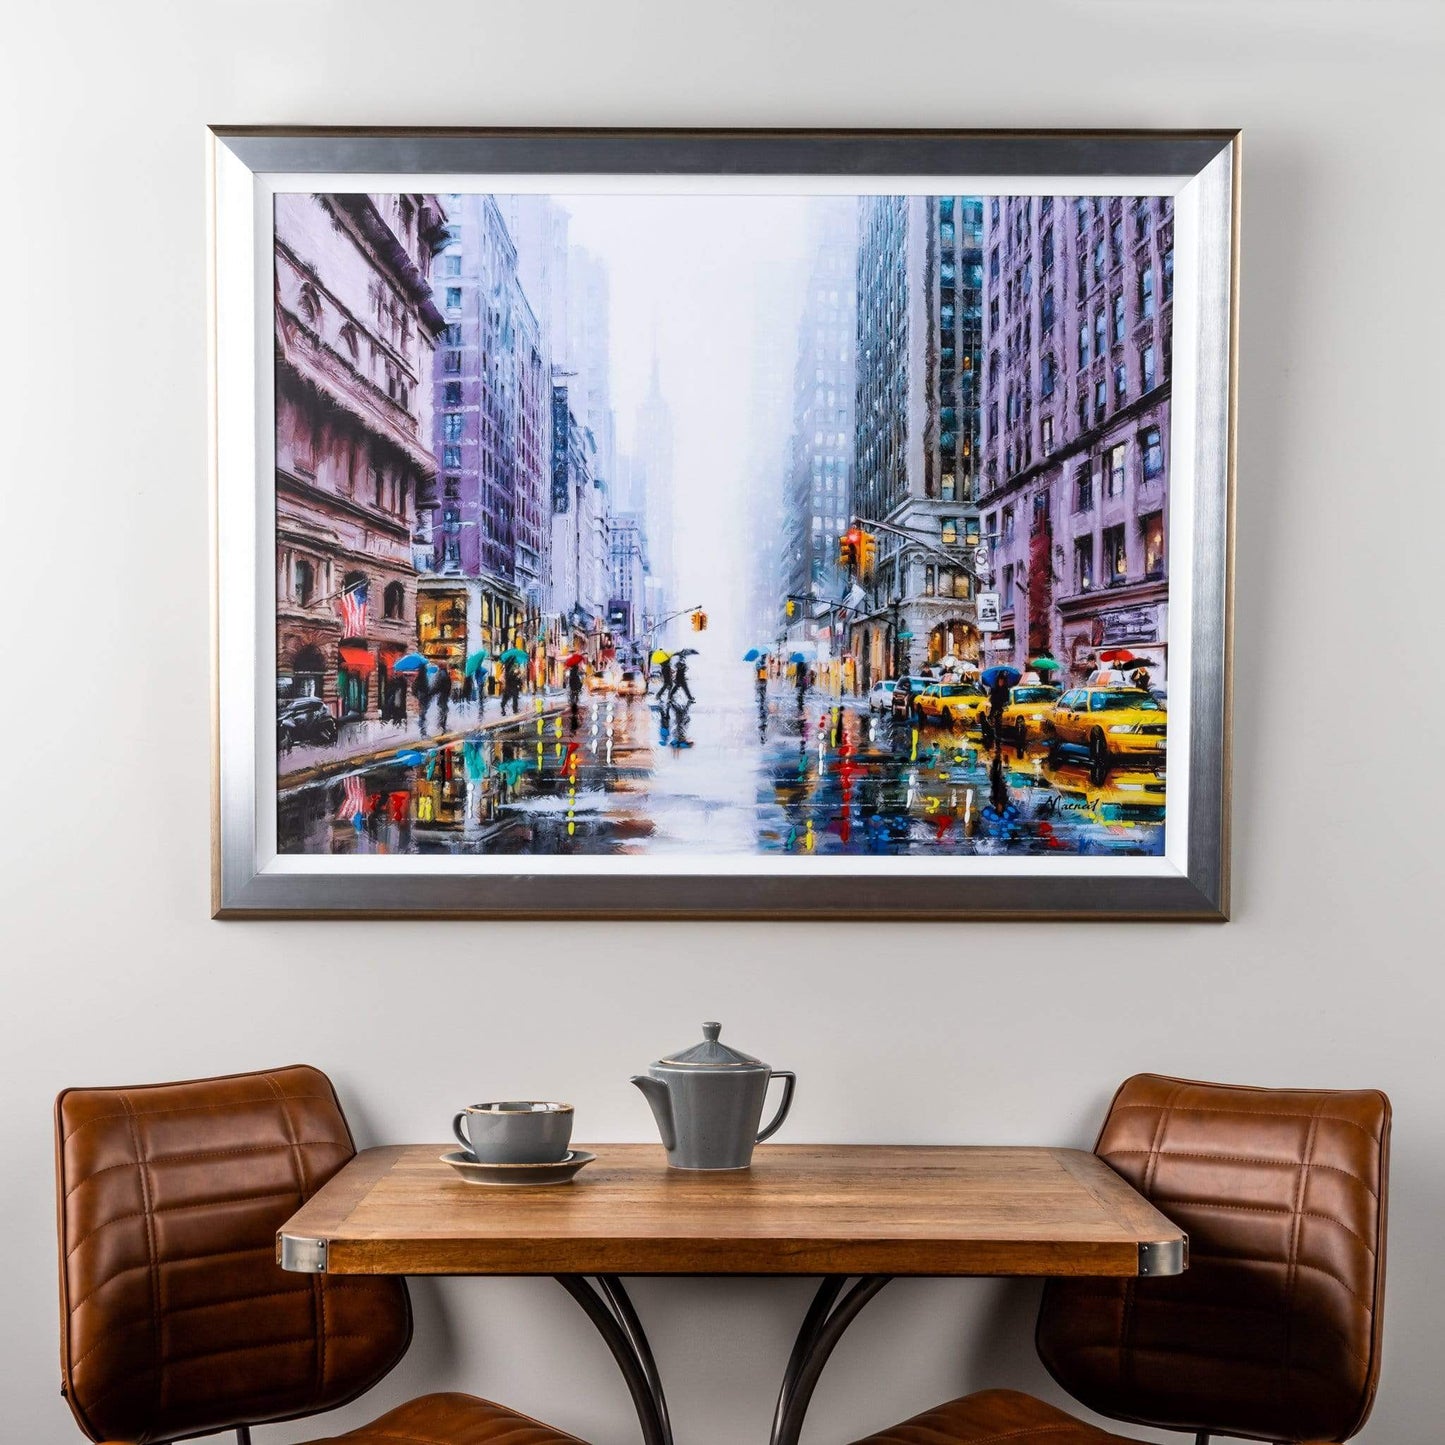 Pictures  -  Rainfall On 5Th Avenue Picture 87.5Cm X 103.5Cm  -  50149308